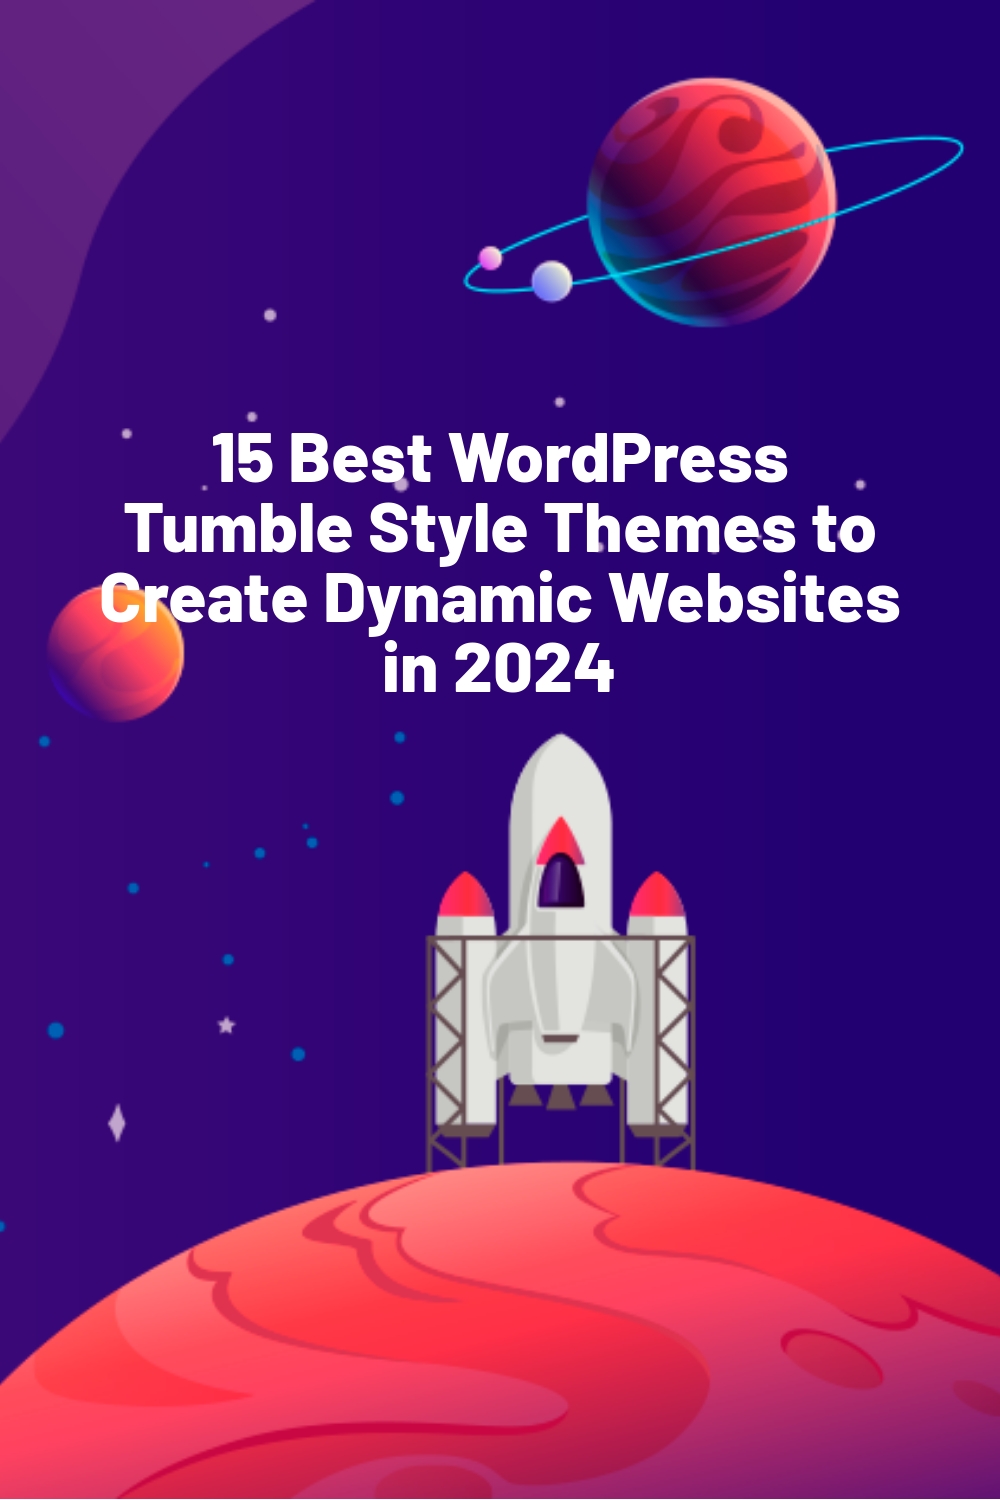 15 Best WordPress Tumble Style Themes to Create Dynamic Websites in 2024